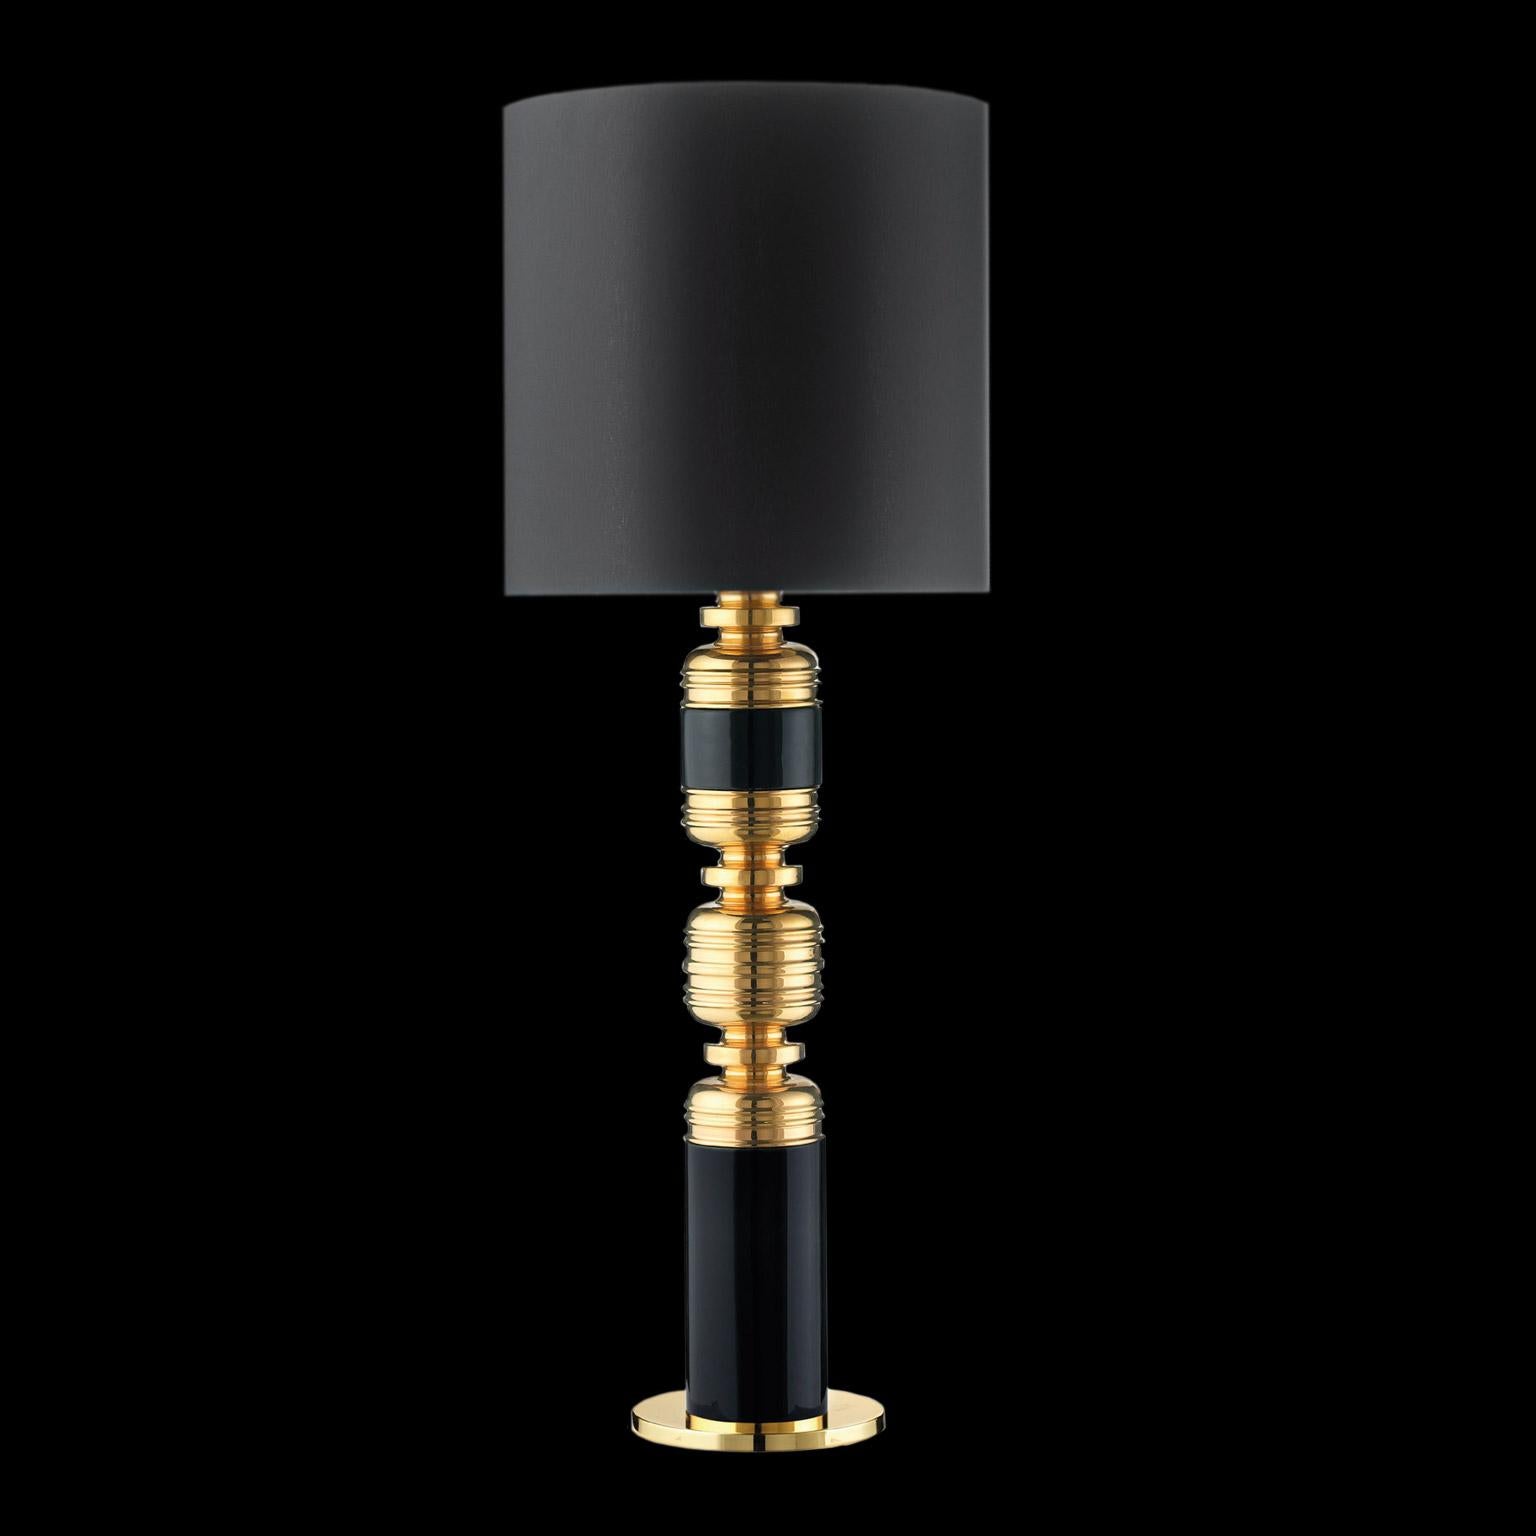 Ceramic lamp THEA 4
cod. LT004
handcrafted in 24-karat gold 
combined with black enamel 
with cotton lampshade

Measures: 
H. 123.0 cm.
Dm. 40.0 cm.